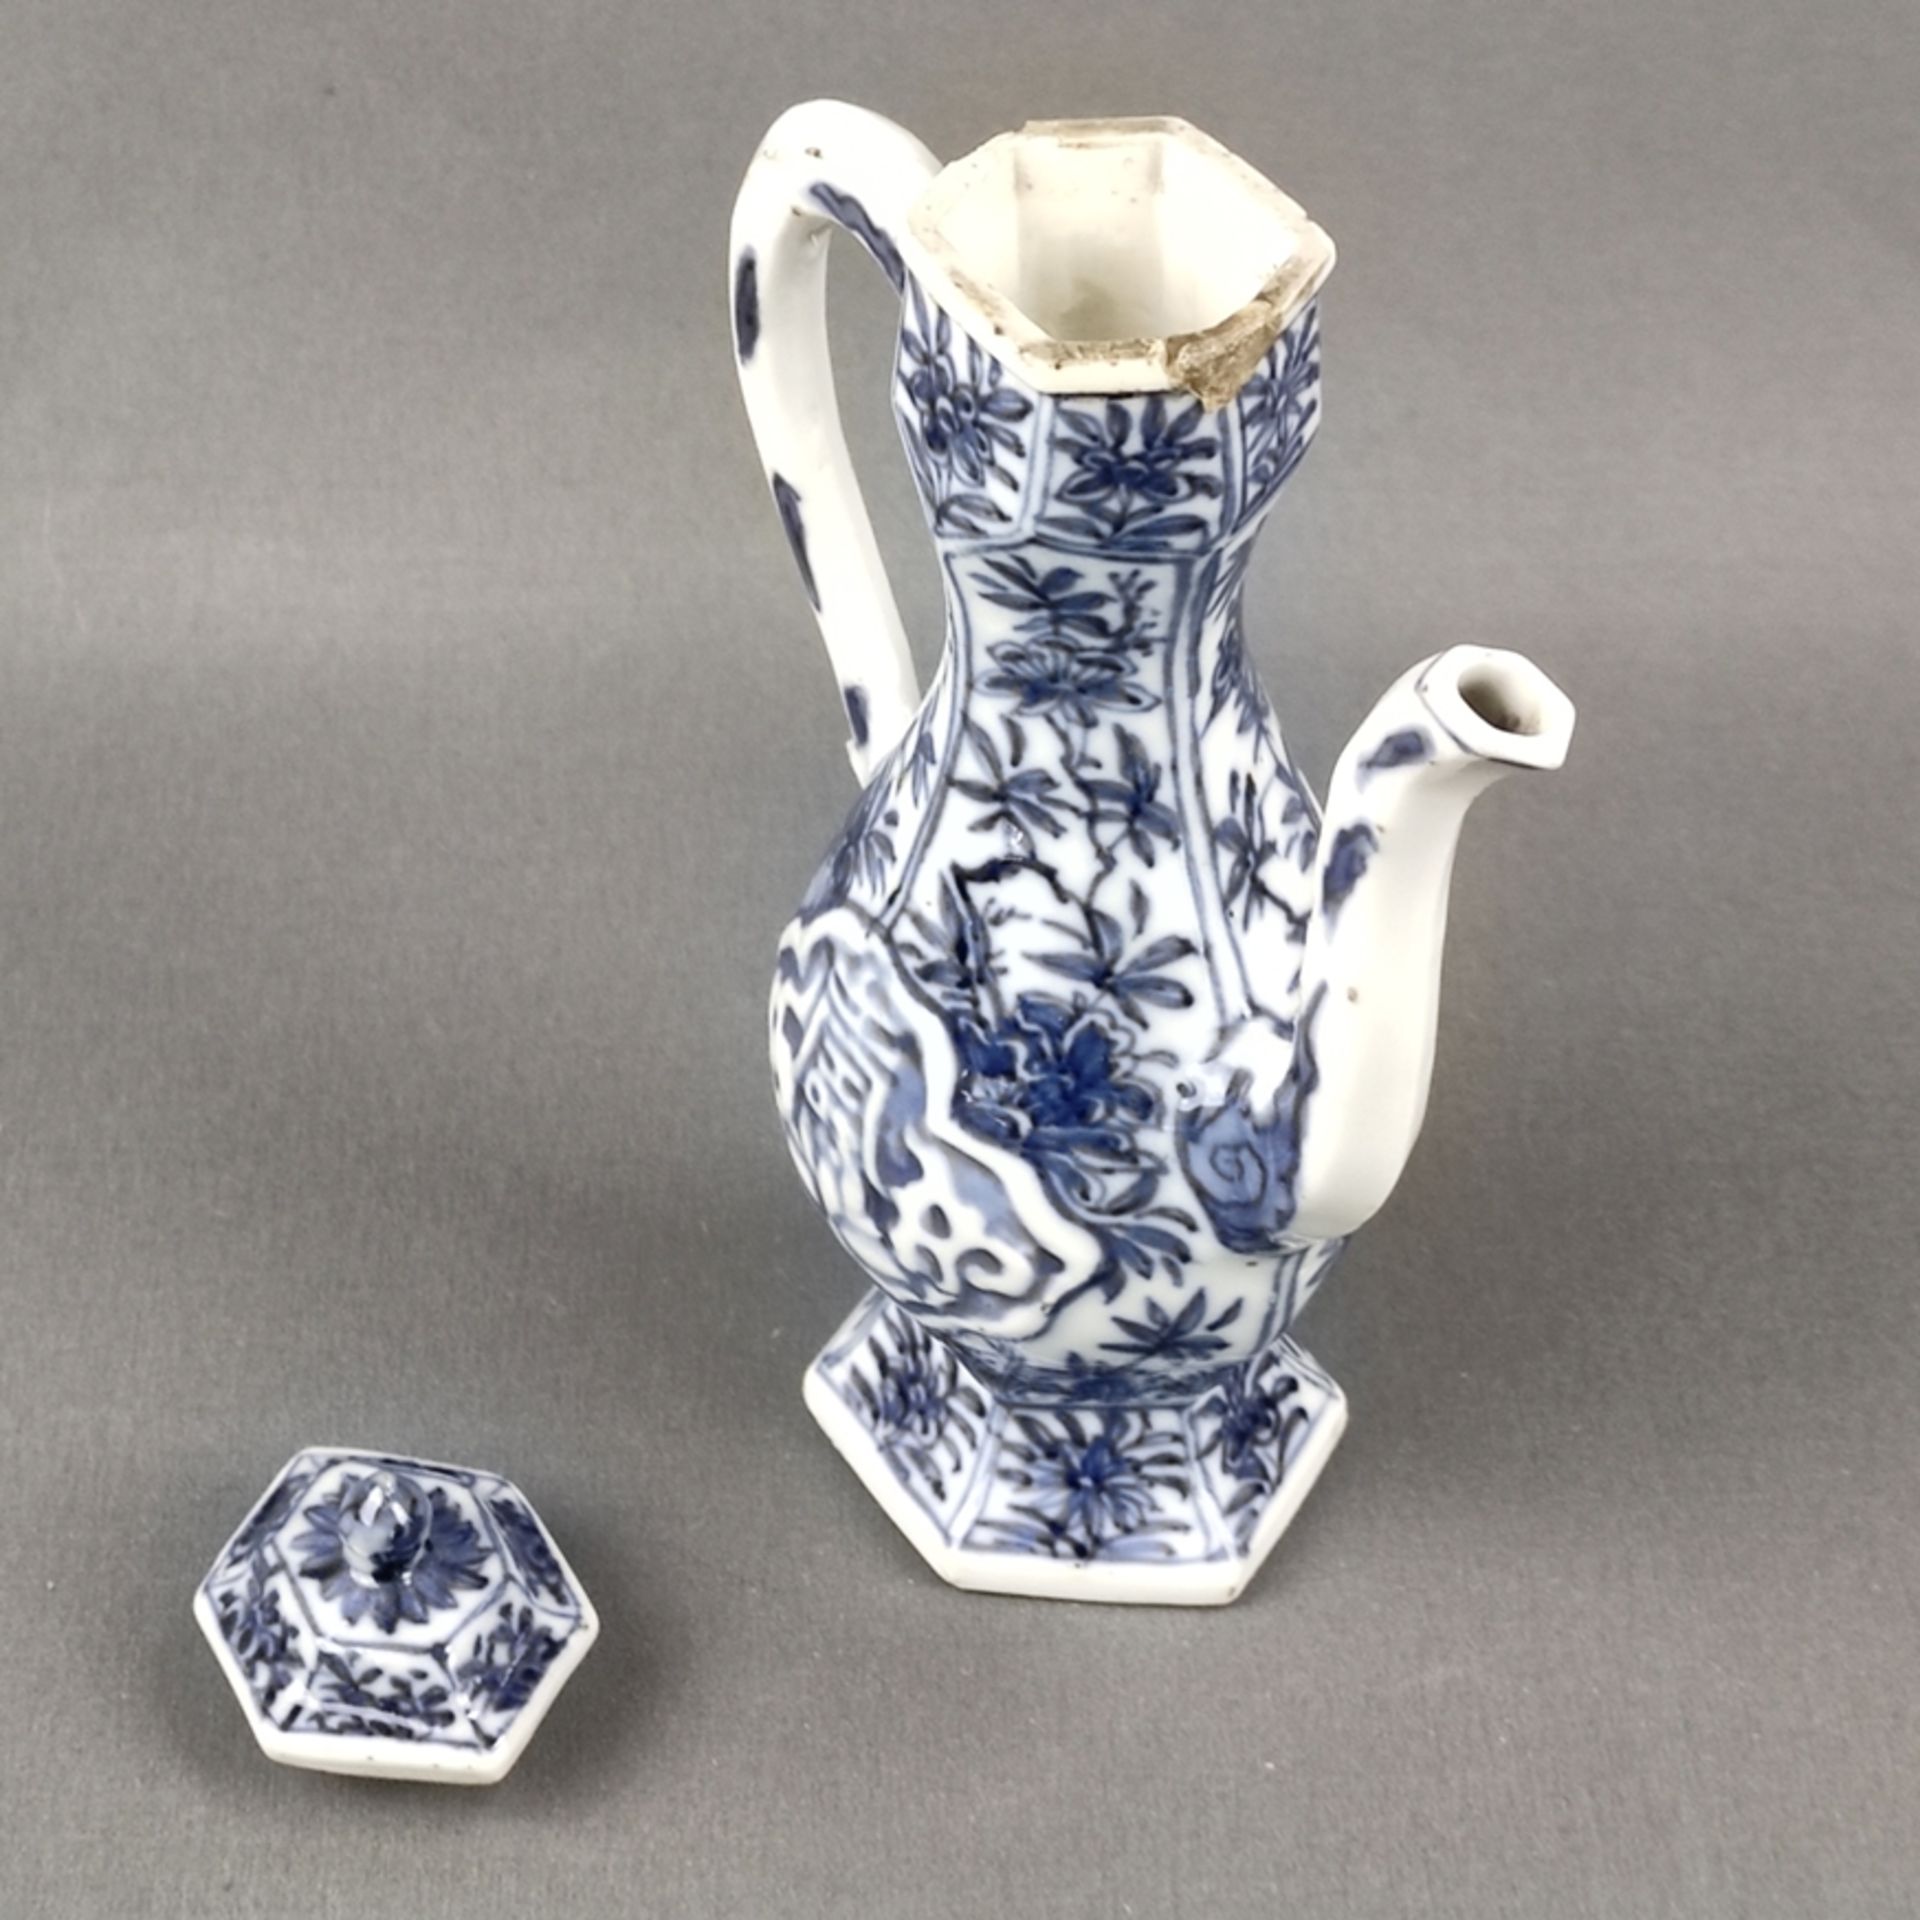 An underglazed blue porcelain jug, China, 18th/19th century, probably made for the Arabian market,  - Image 2 of 4